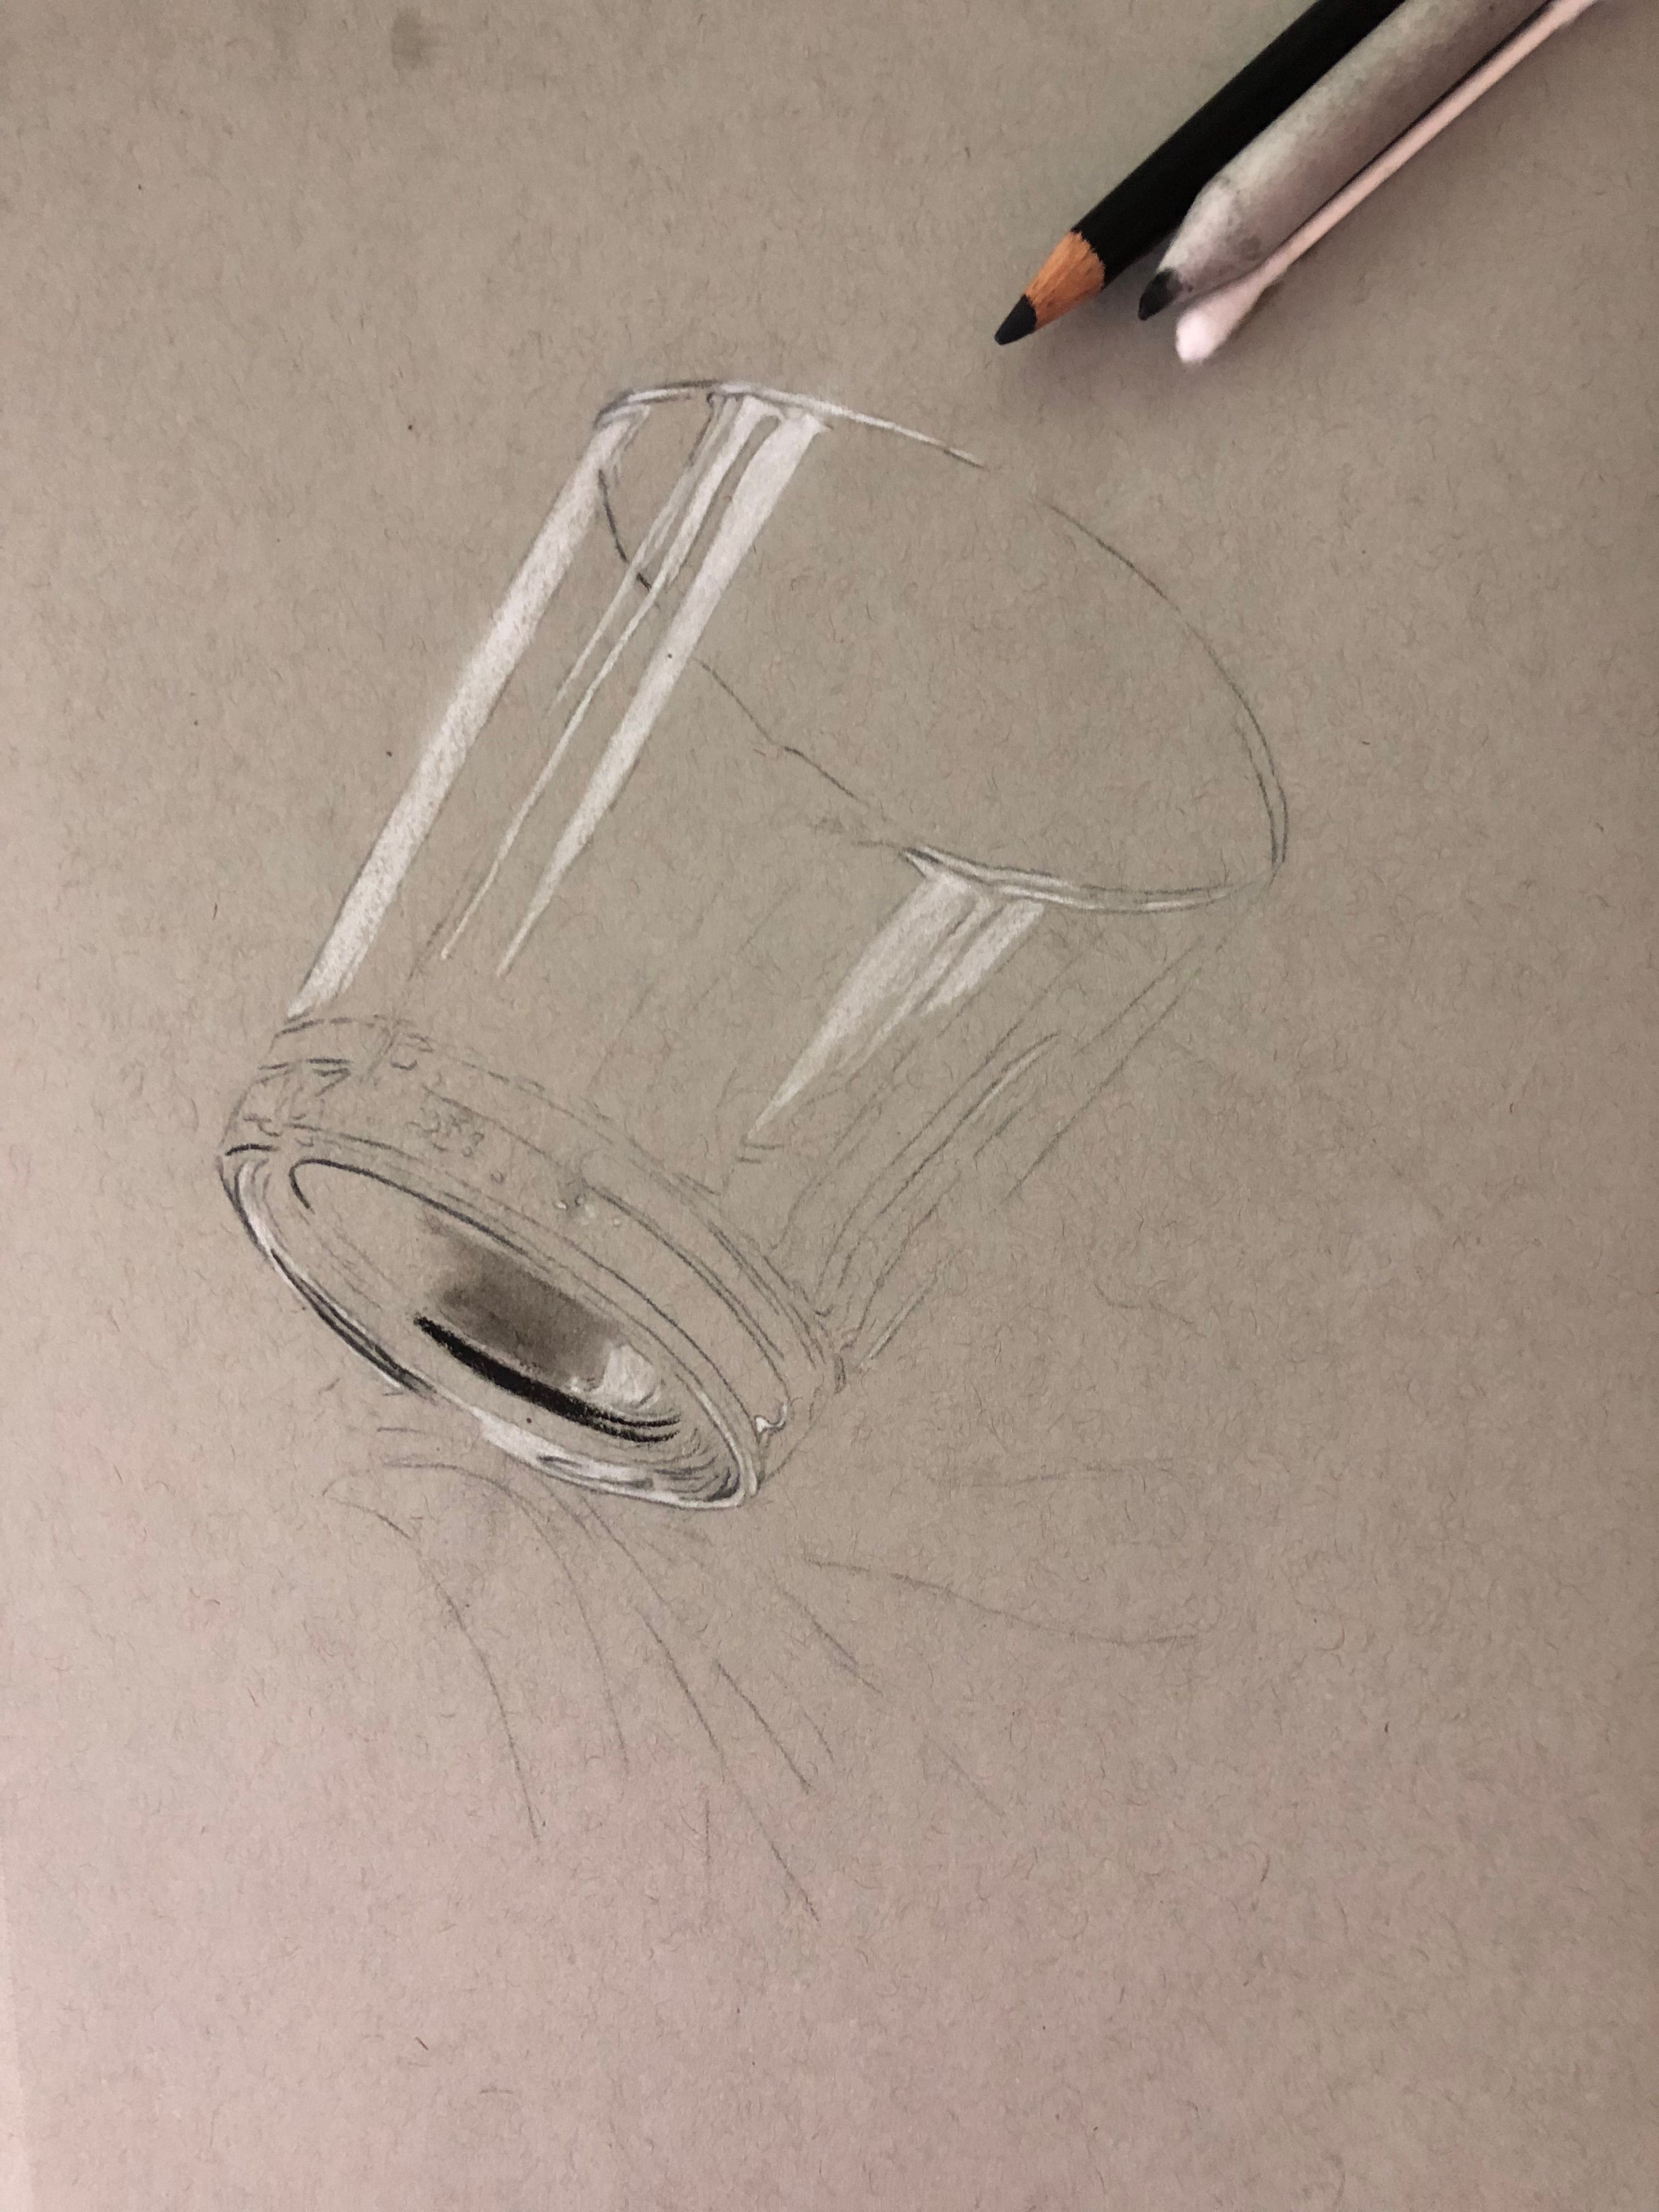 Realism Art How To Draw A 3d Object Steemit